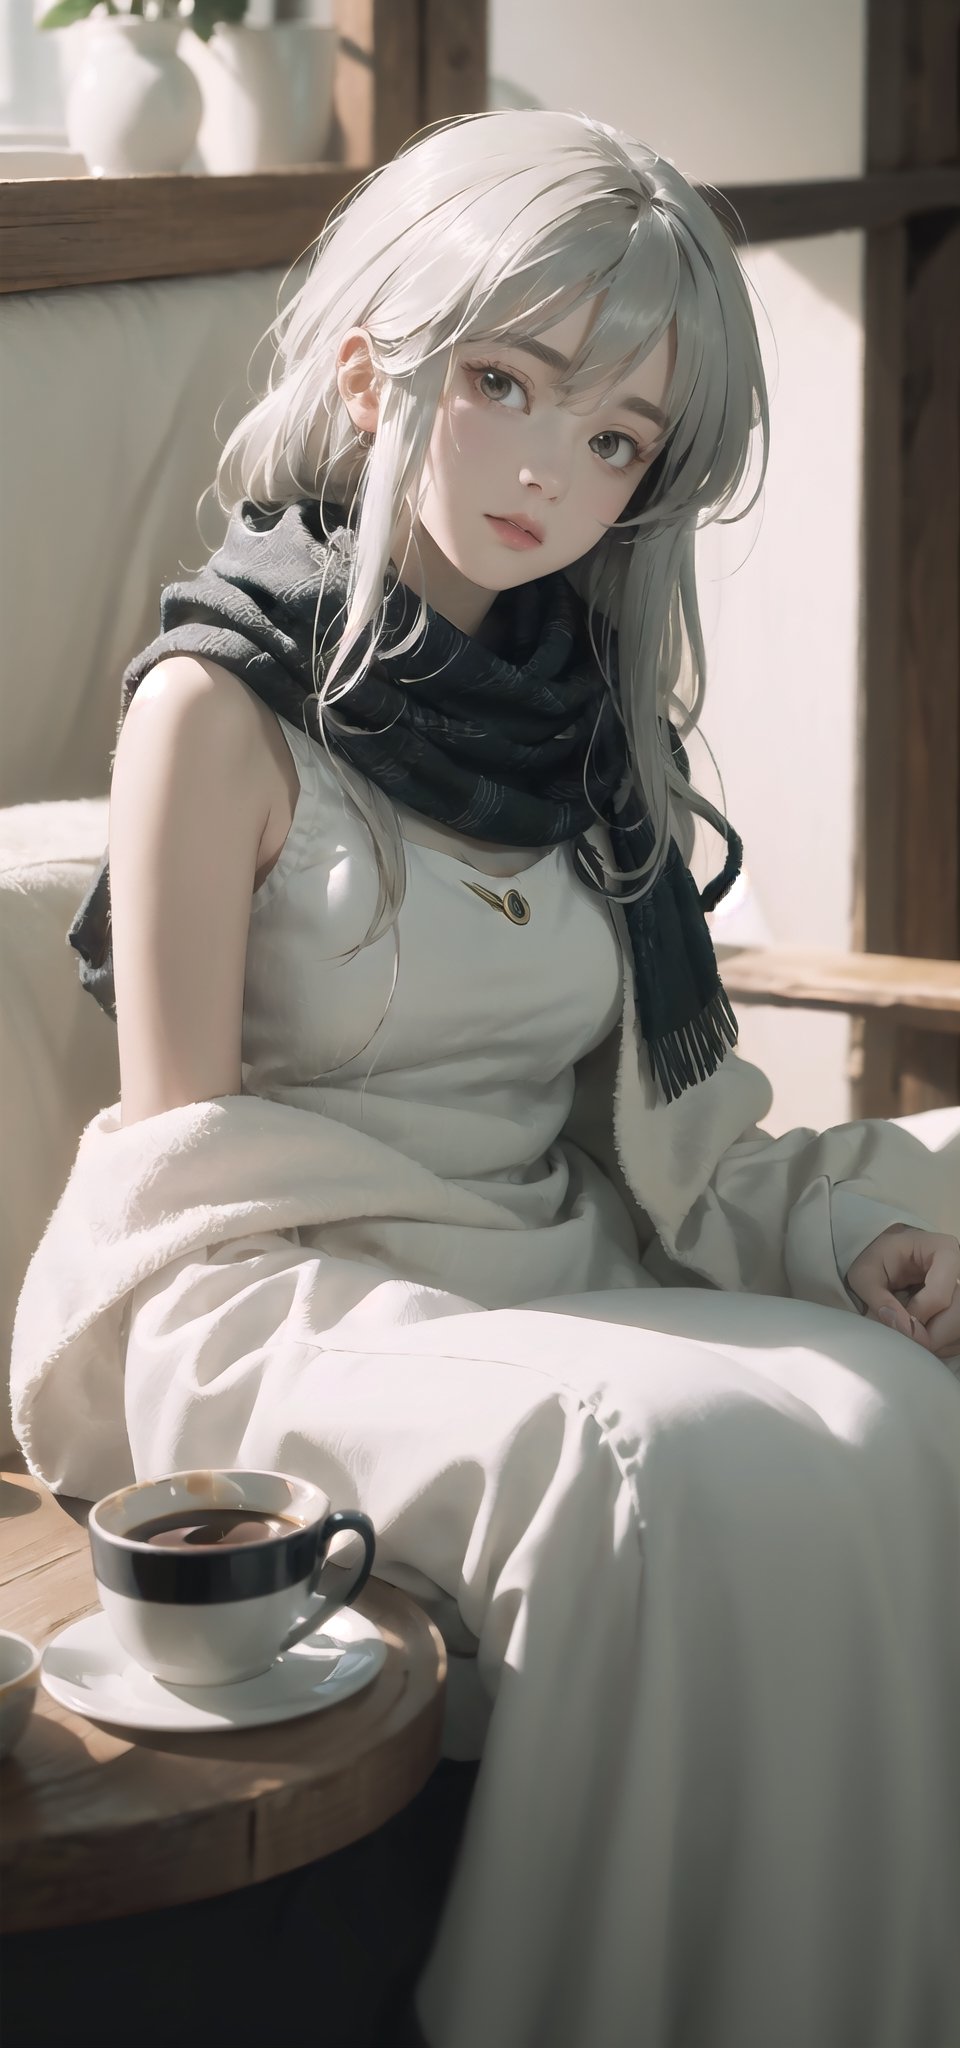 amiya(arknights), 1girl,8k wallpaper,extremely detailed figure, amazing beauty, detailed characters, {detailed background},aestheticism, sitting, winter, coffee shop, corner, coat, scarf, large breasts, gray hair, red eyes, emotionless, obedient, obedient, thick eyebrows, small nose, full lips, long eyelashes, delicate neck, slender shoulders, bare arms, delicate hands, long fingers, pointed nails, high cheekbones, oval face, smooth skin, rosy cheeks, cup of coffee, saucer, steam, warm, cozy, comfortable, relaxed, calm, quiet, peaceful, serene, contemplative, close-up, best quality, amazing quality, very aesthetic, absurdres, Christmas dresses 